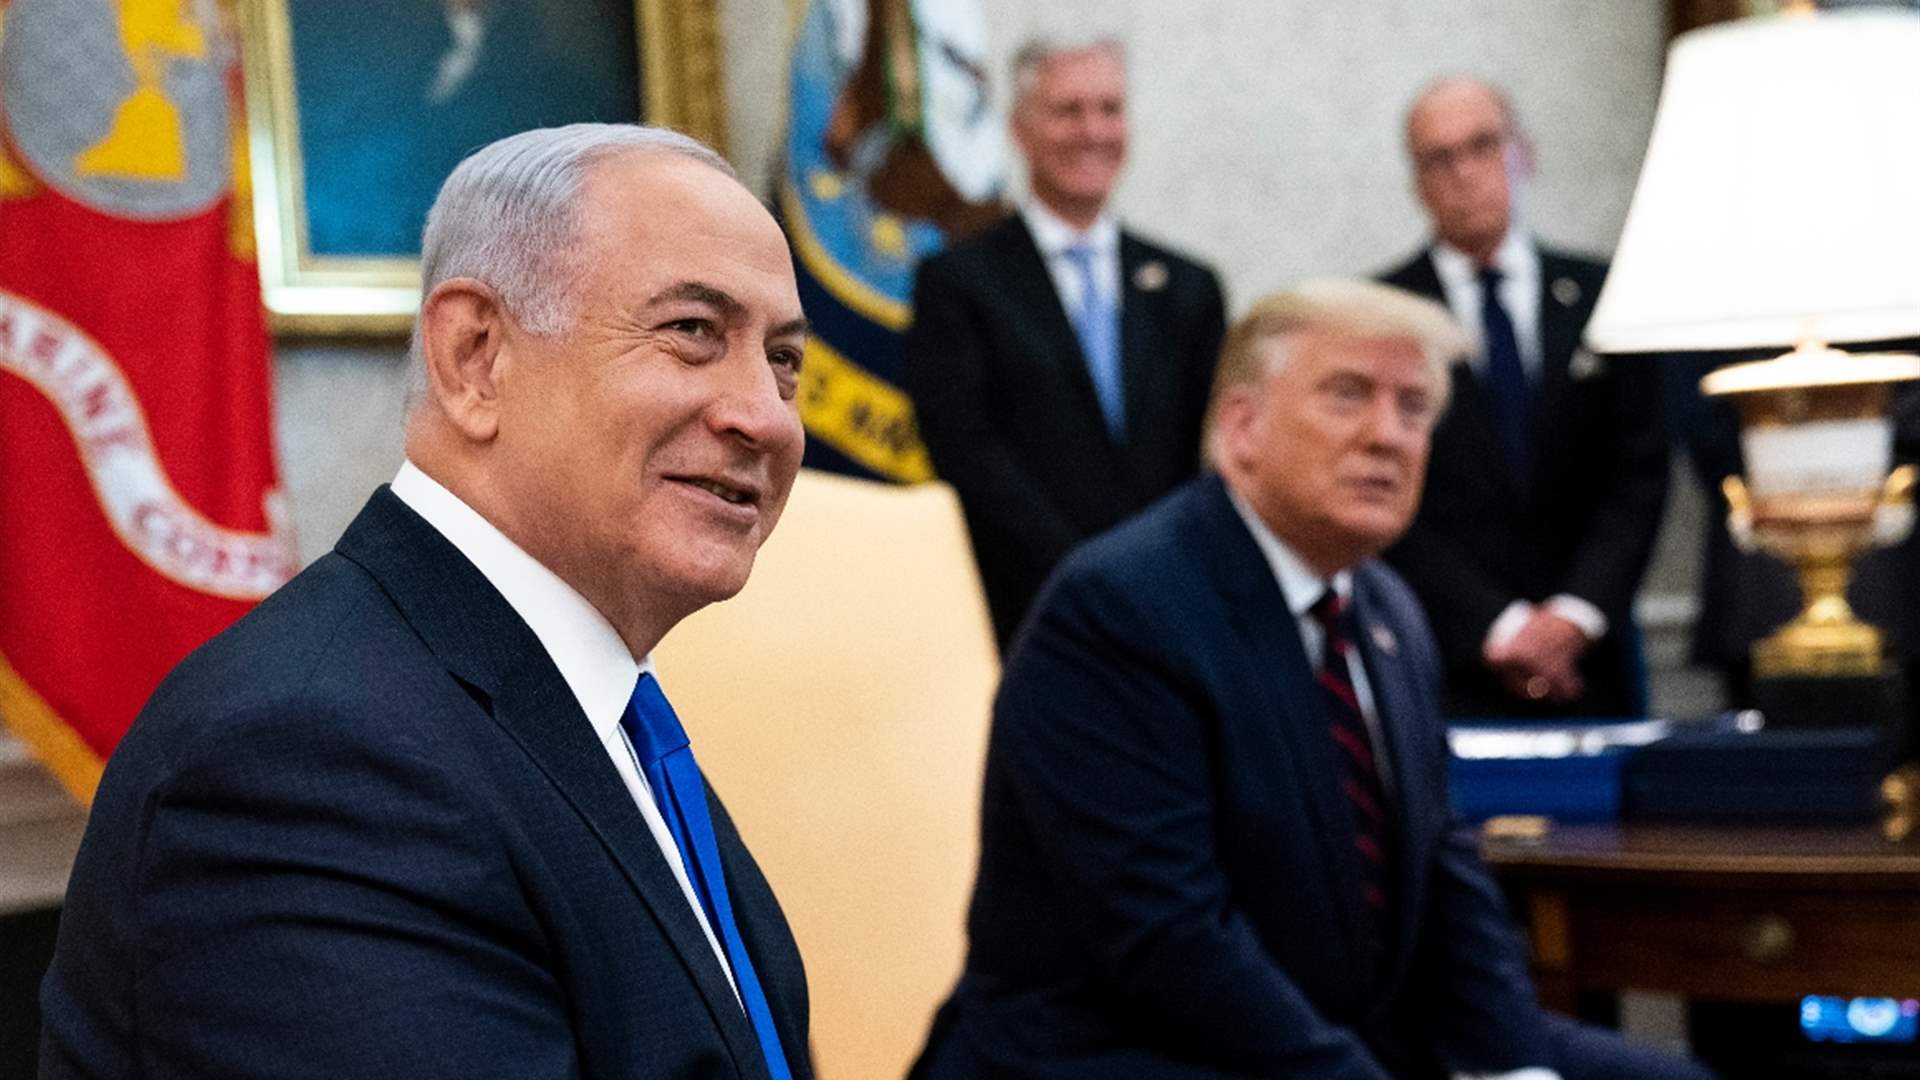 Netanyahu requests meeting with former President Trump, Politico reports